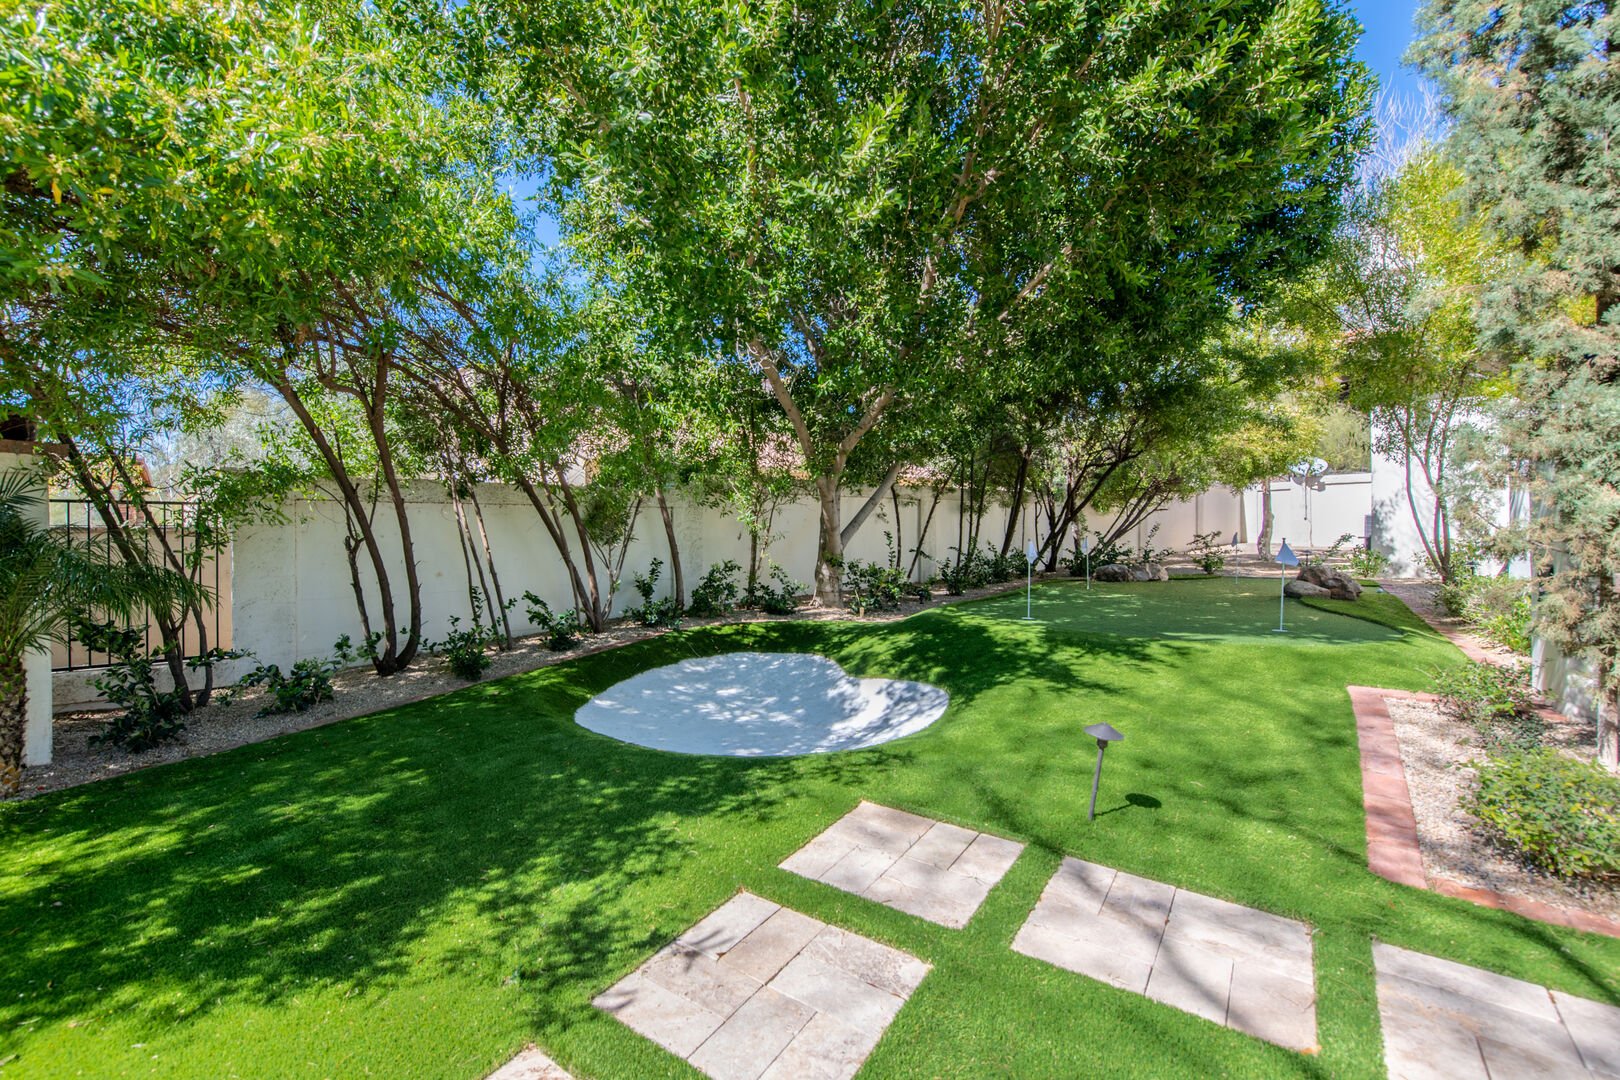 You can practice your short game at in the spacious back yard of Valley Vista.